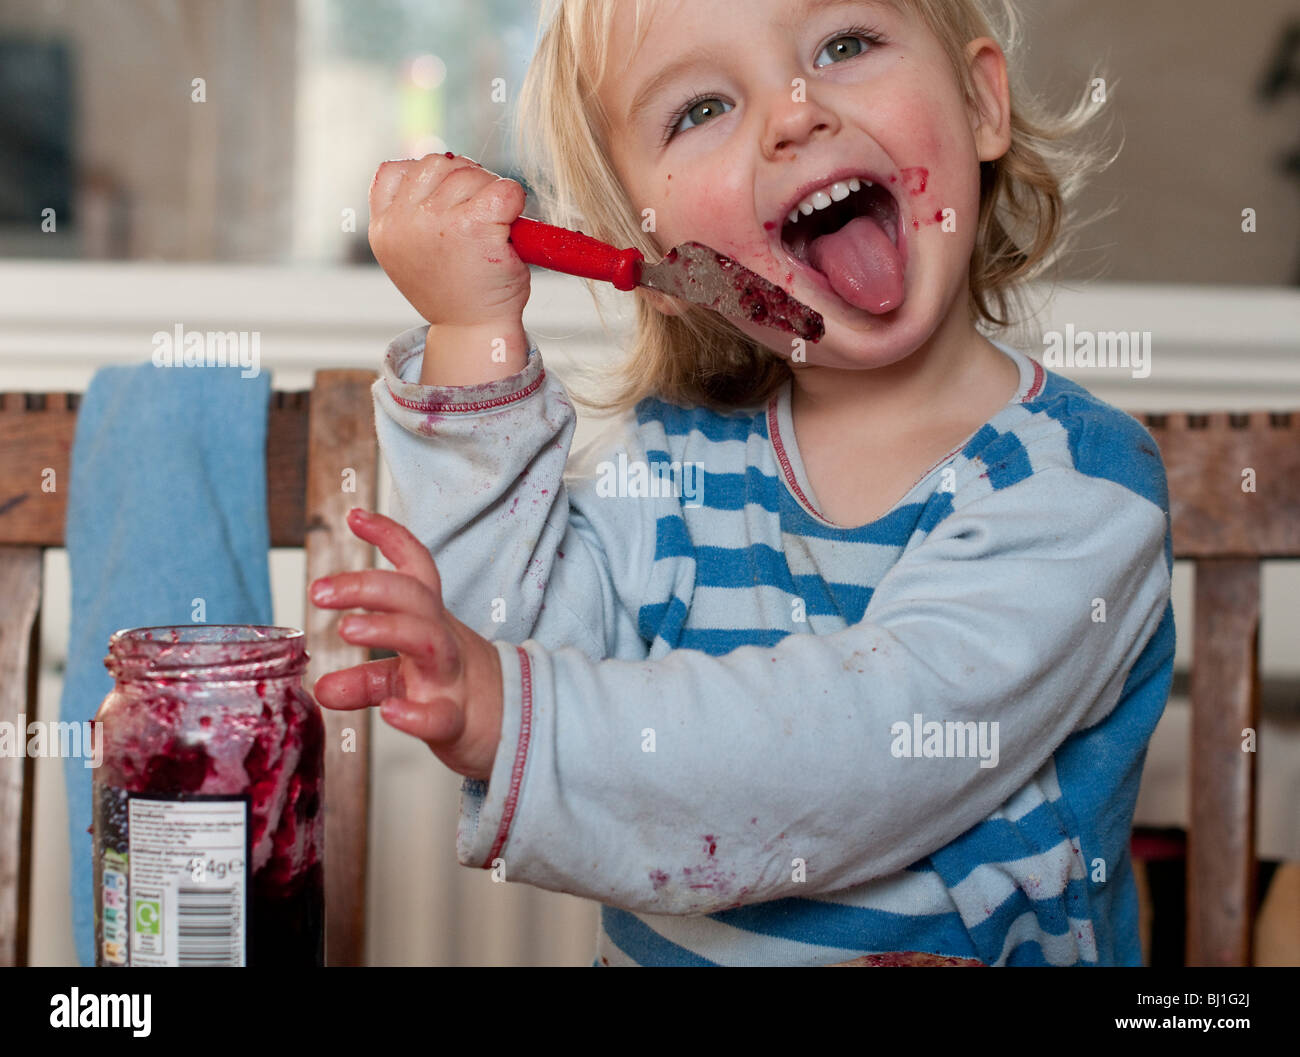 A young boy with no manners, smiles as he licks jam from his knife at the breakfast table Stock Photo